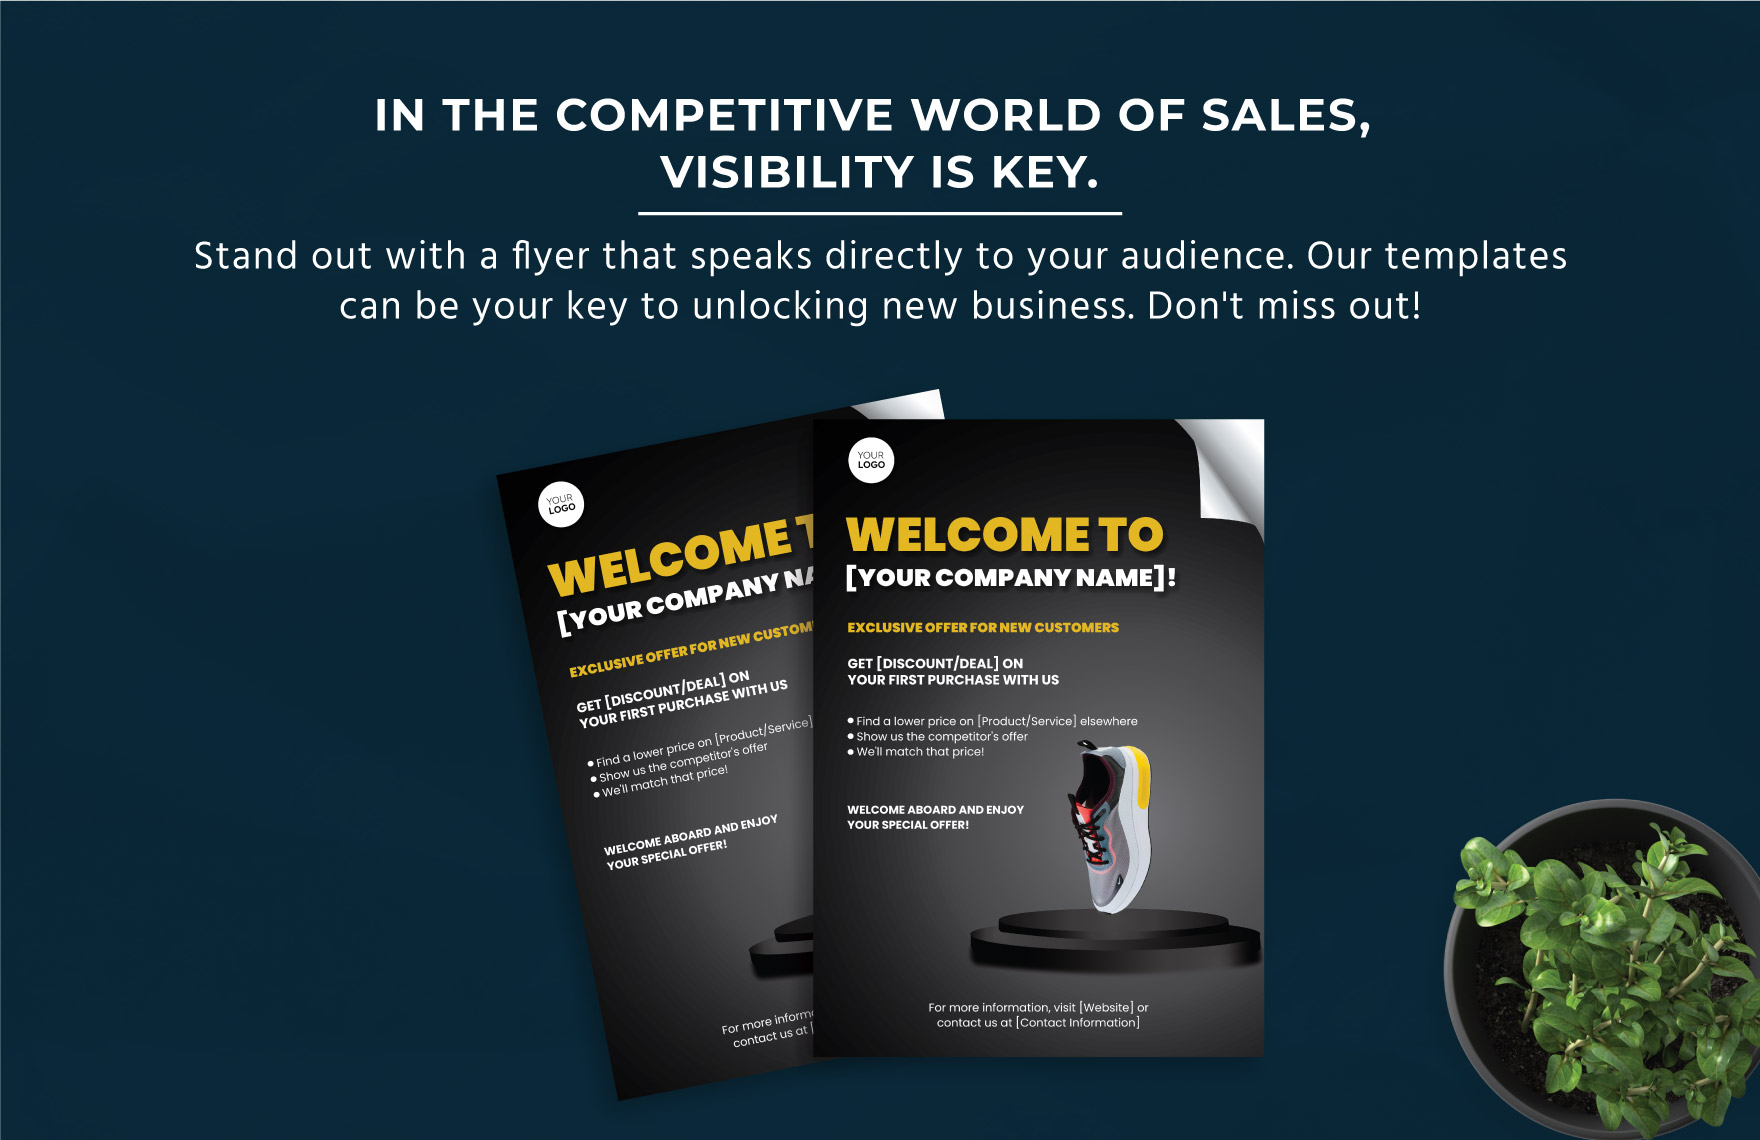 Sales New Customer Welcome Offer Flyer Template